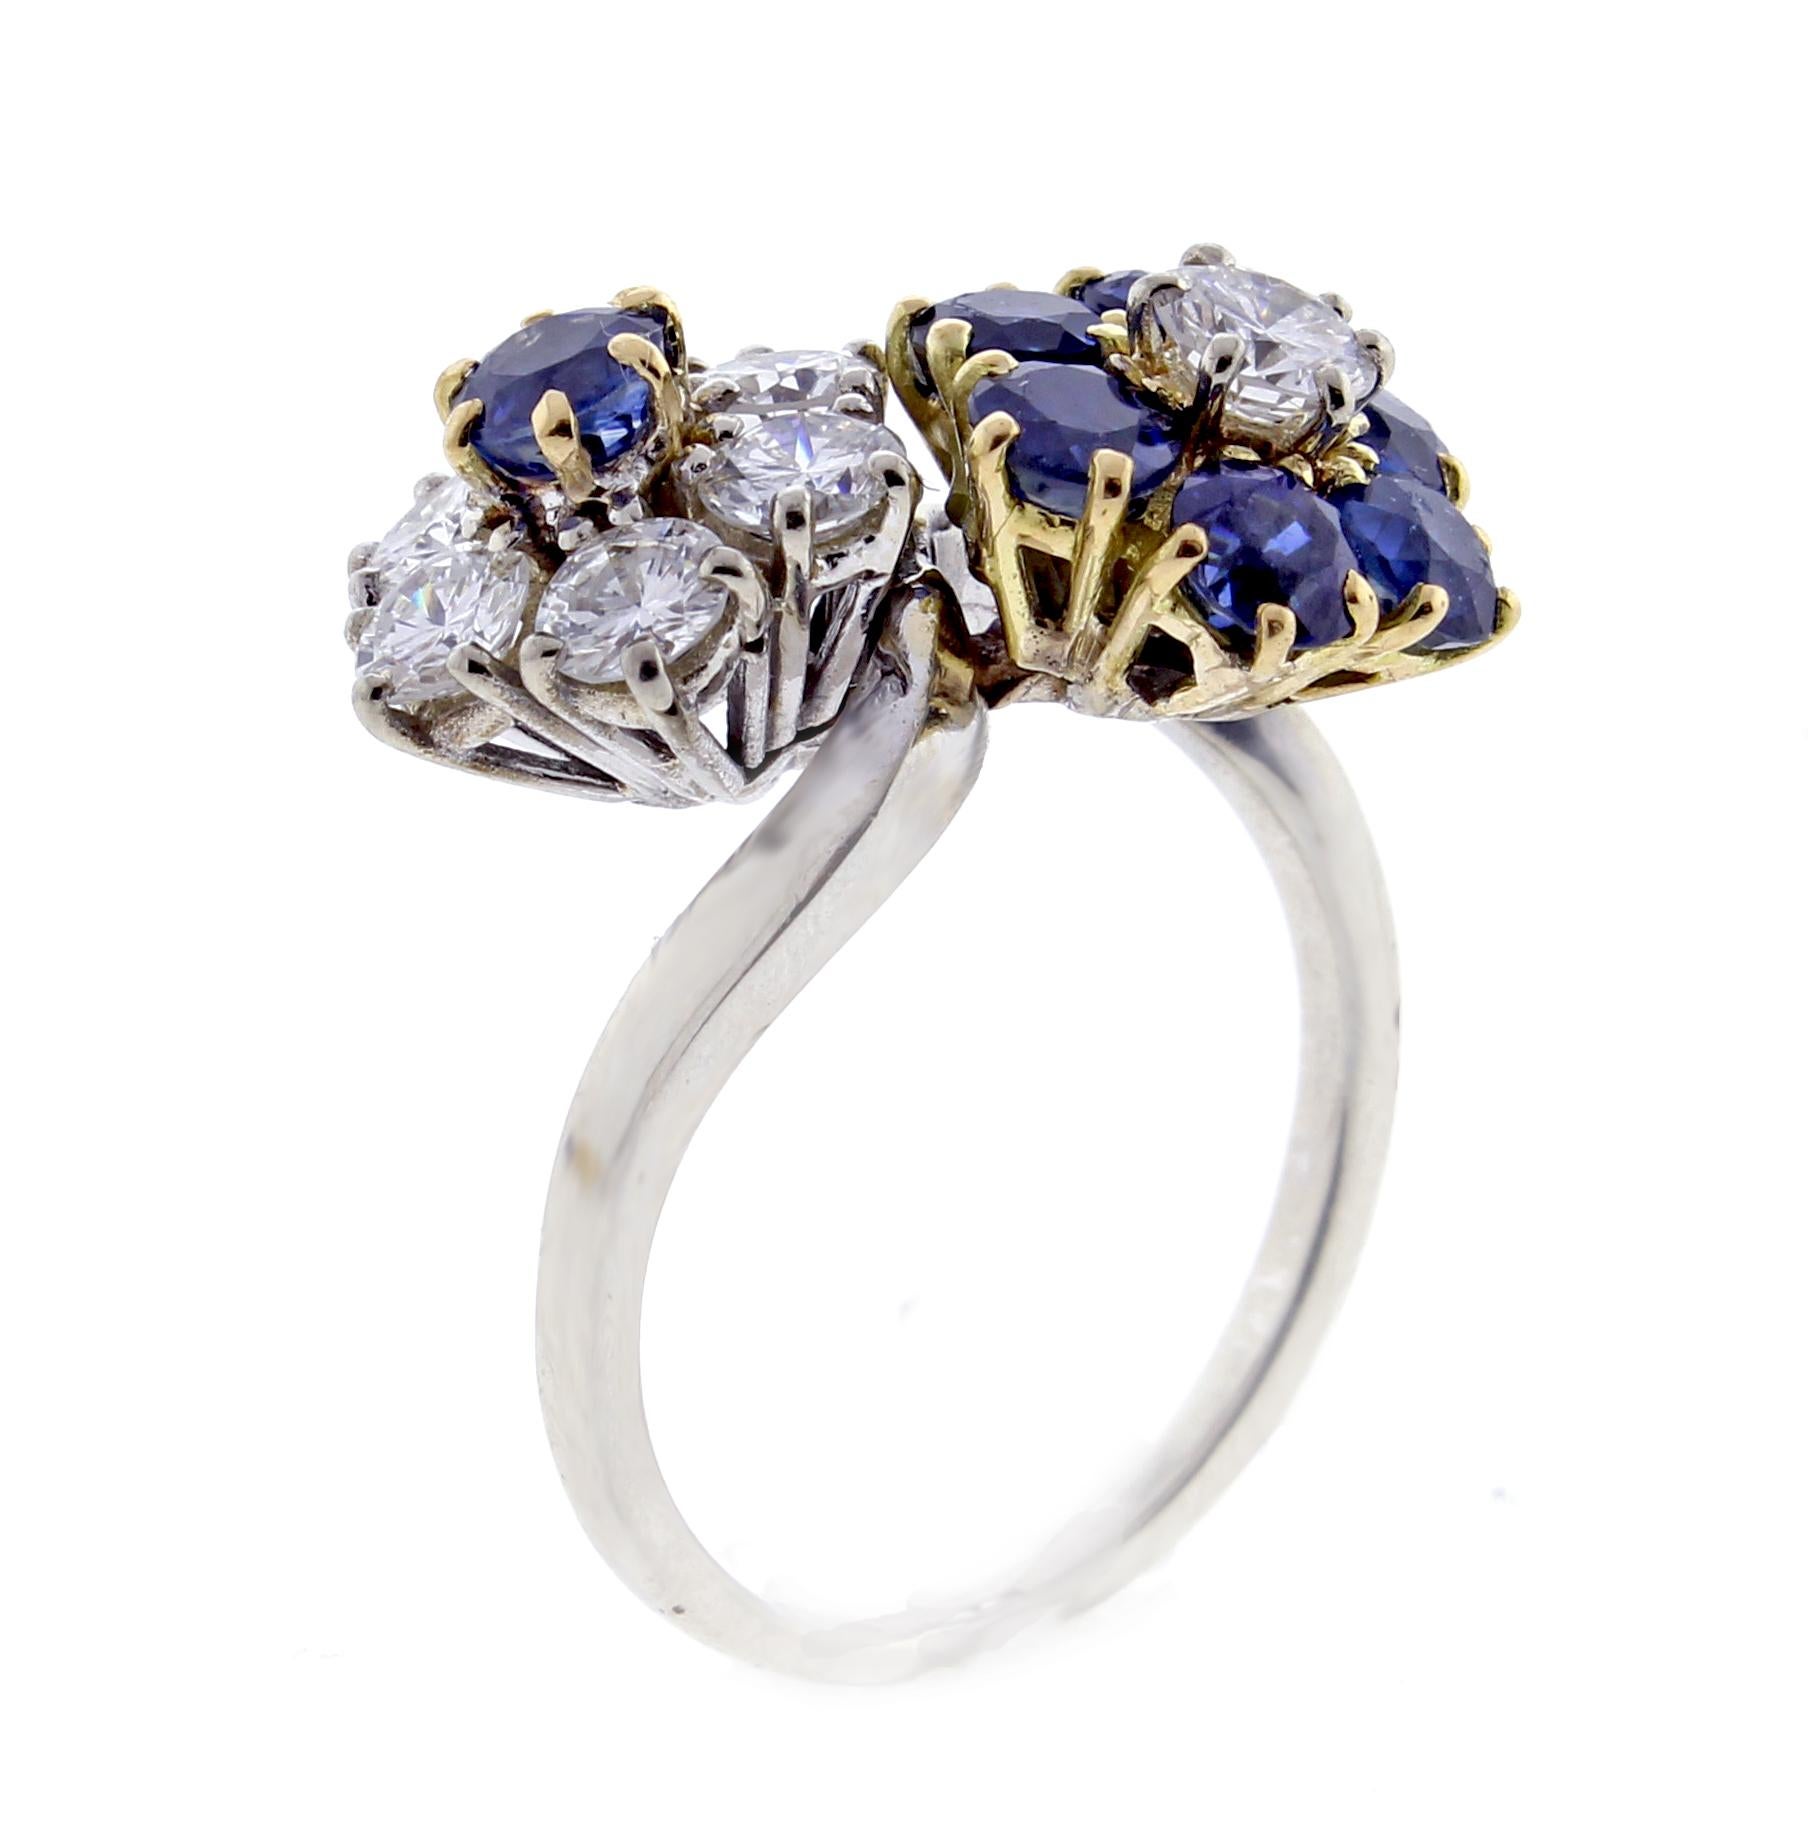 From the  Van Cleef & Arpels  Fleurette collection, a sapphire and diamond double flower ring. The ring boast 7 diamonds weighing approximately 1.40 carat and 7 sapphire weighing approximately 1.05 carats.  Set in 18 karat white and yellow gold.